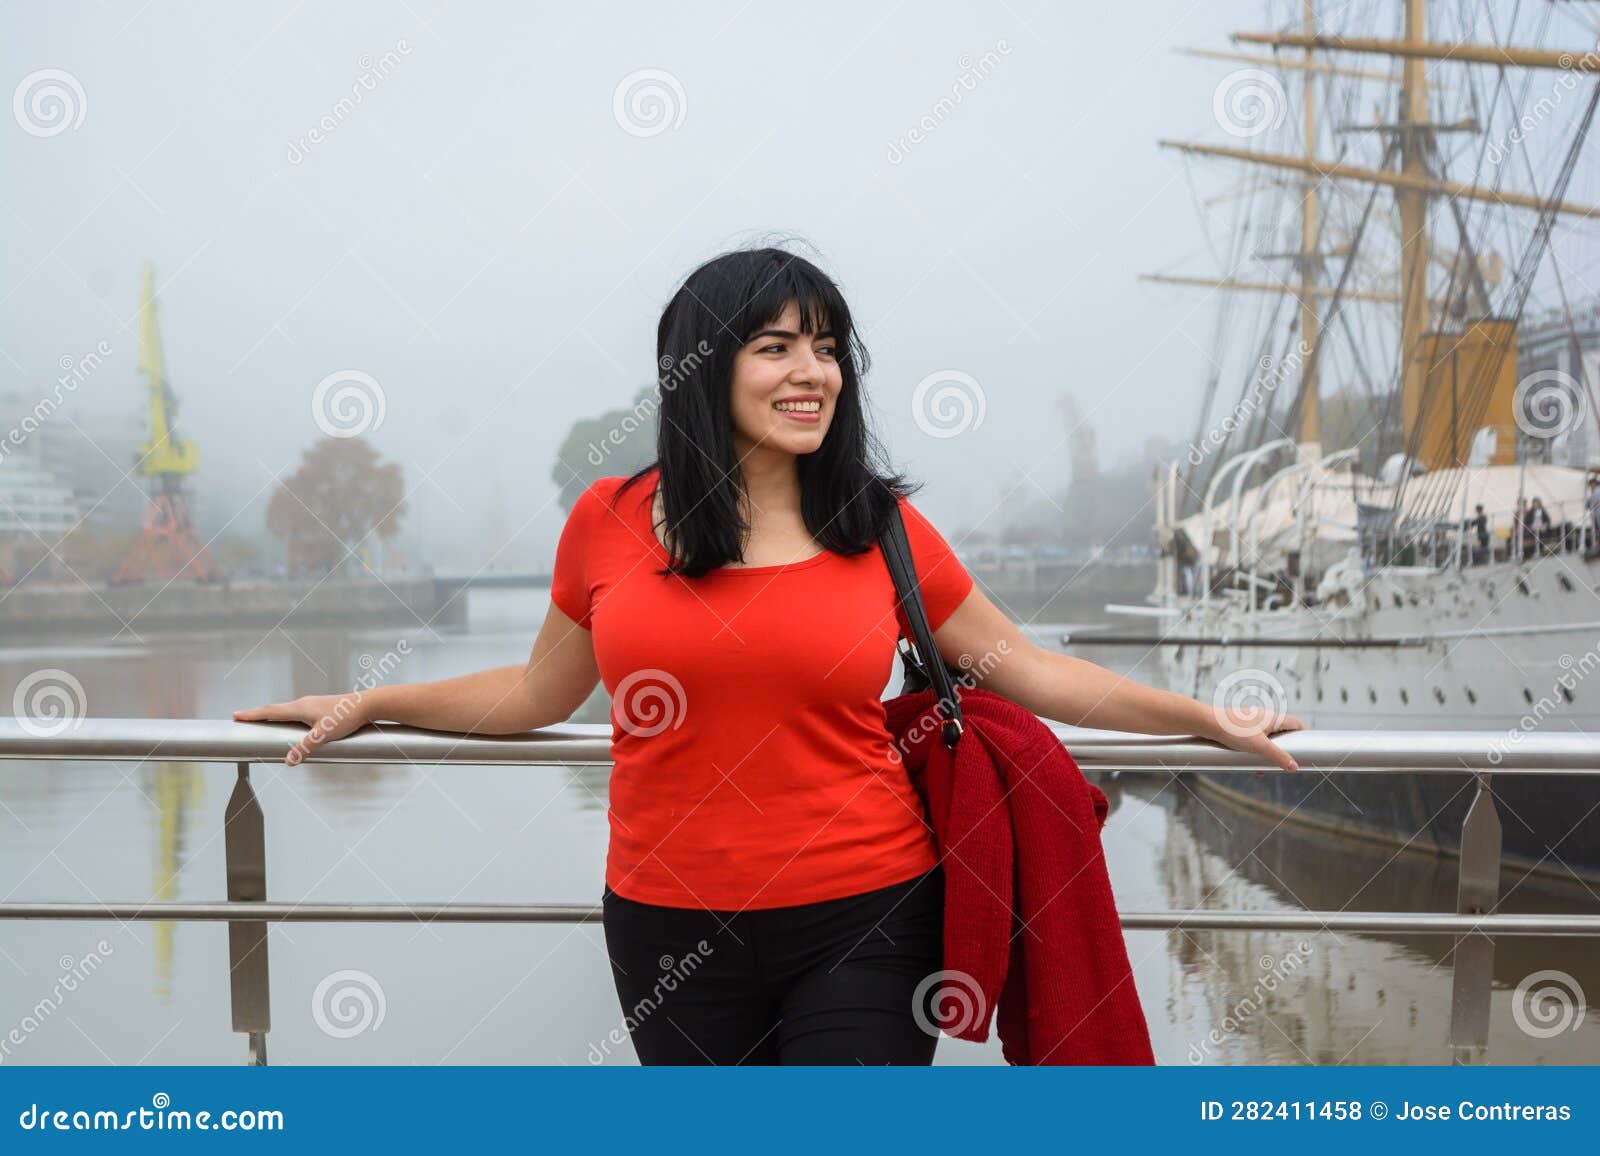 young latin woman tourist standing on the puente de la mujer in buenos aires looking to the side